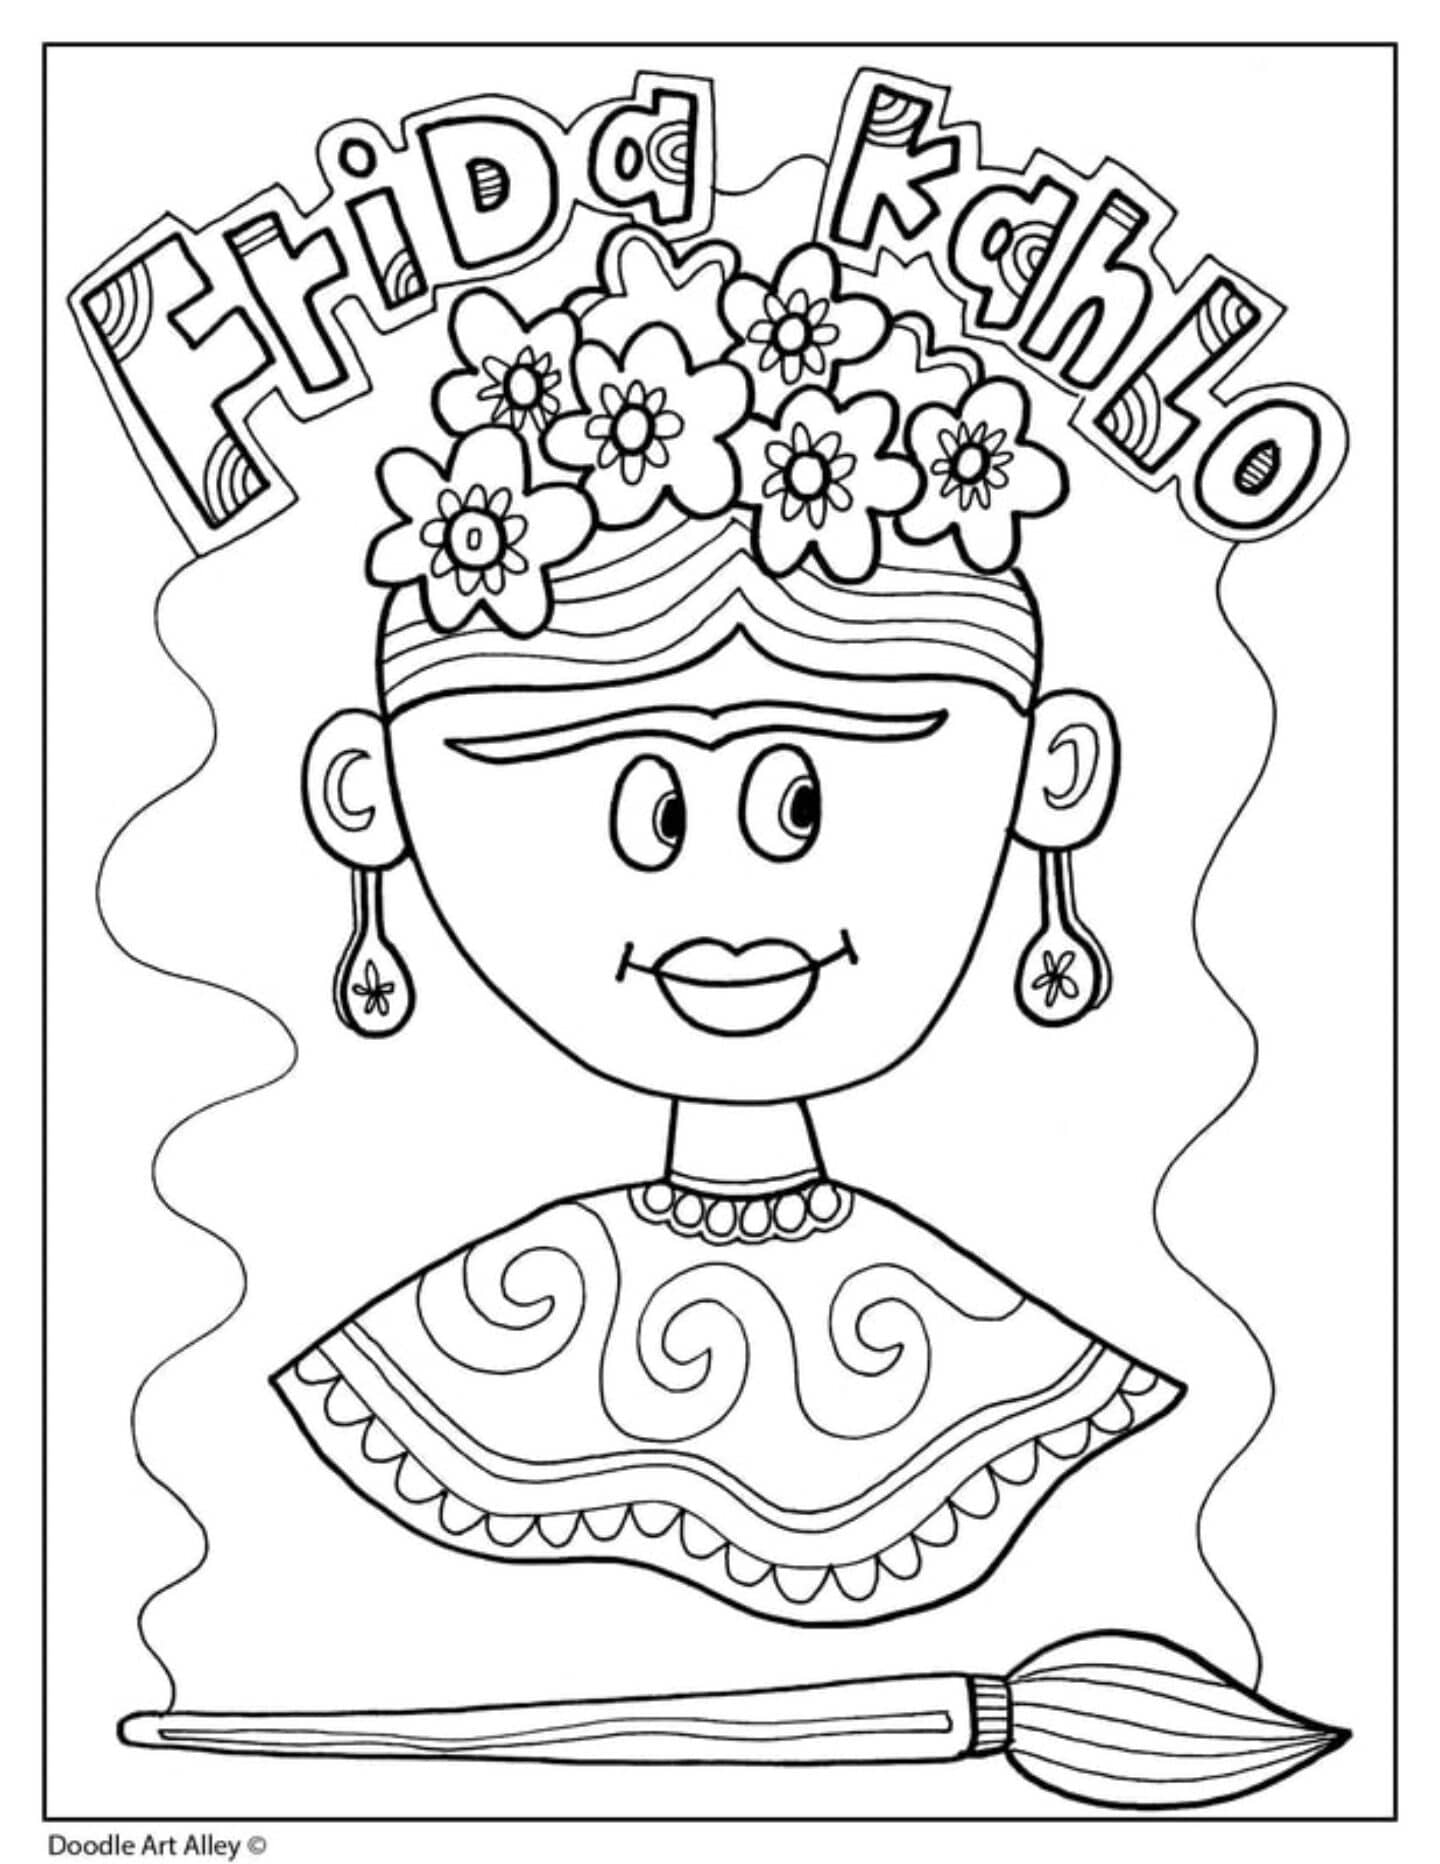 Hispanic heritage month coloring pages